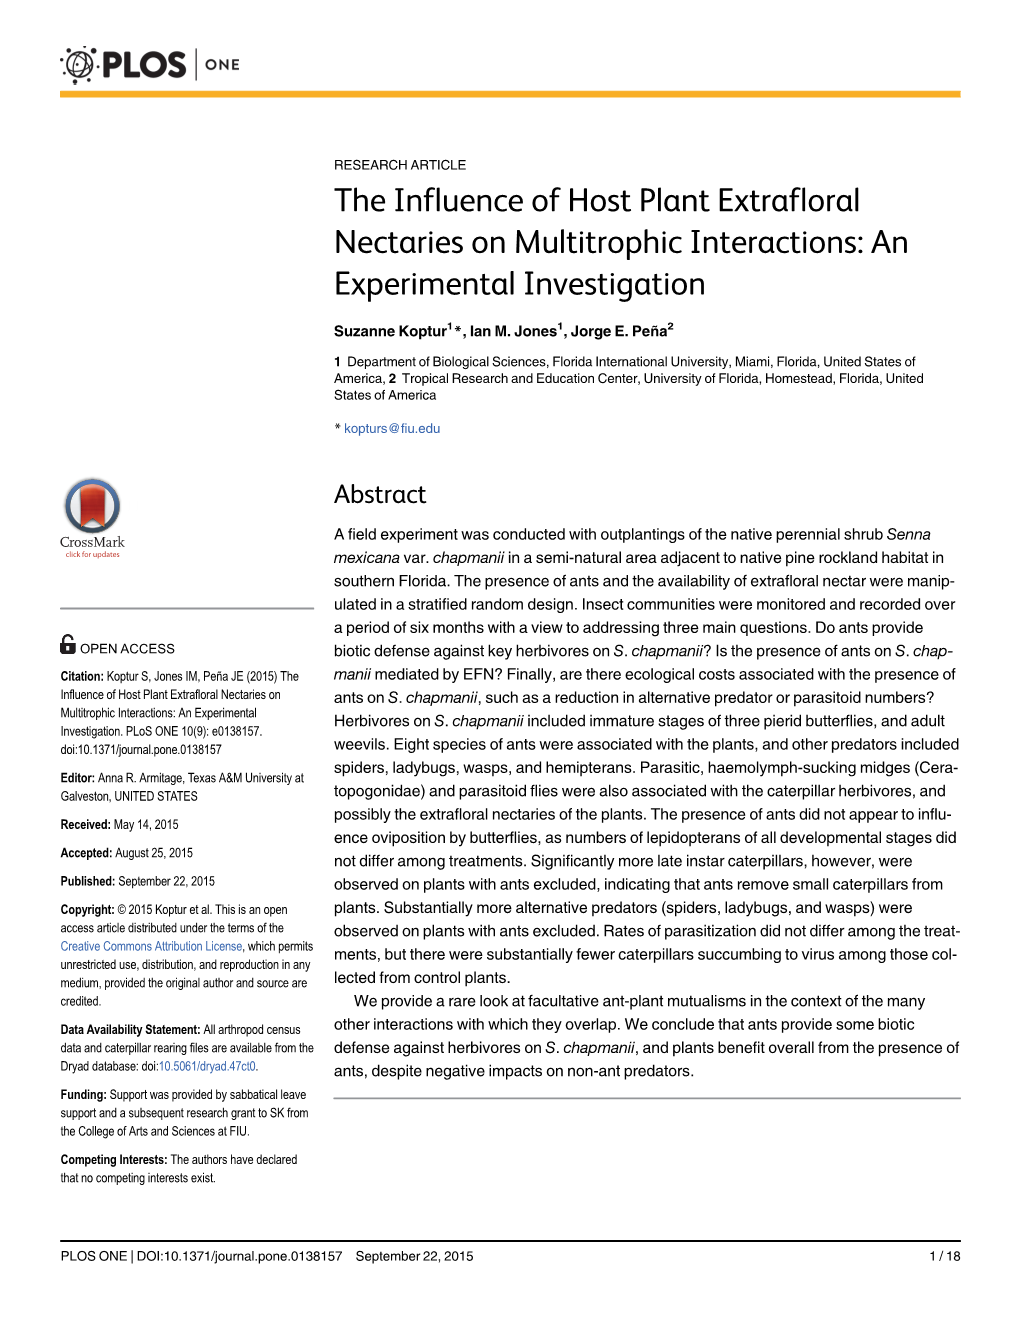 The Influence of Host Plant Extrafloral Nectaries on Multitrophic Interactions: an Experimental Investigation